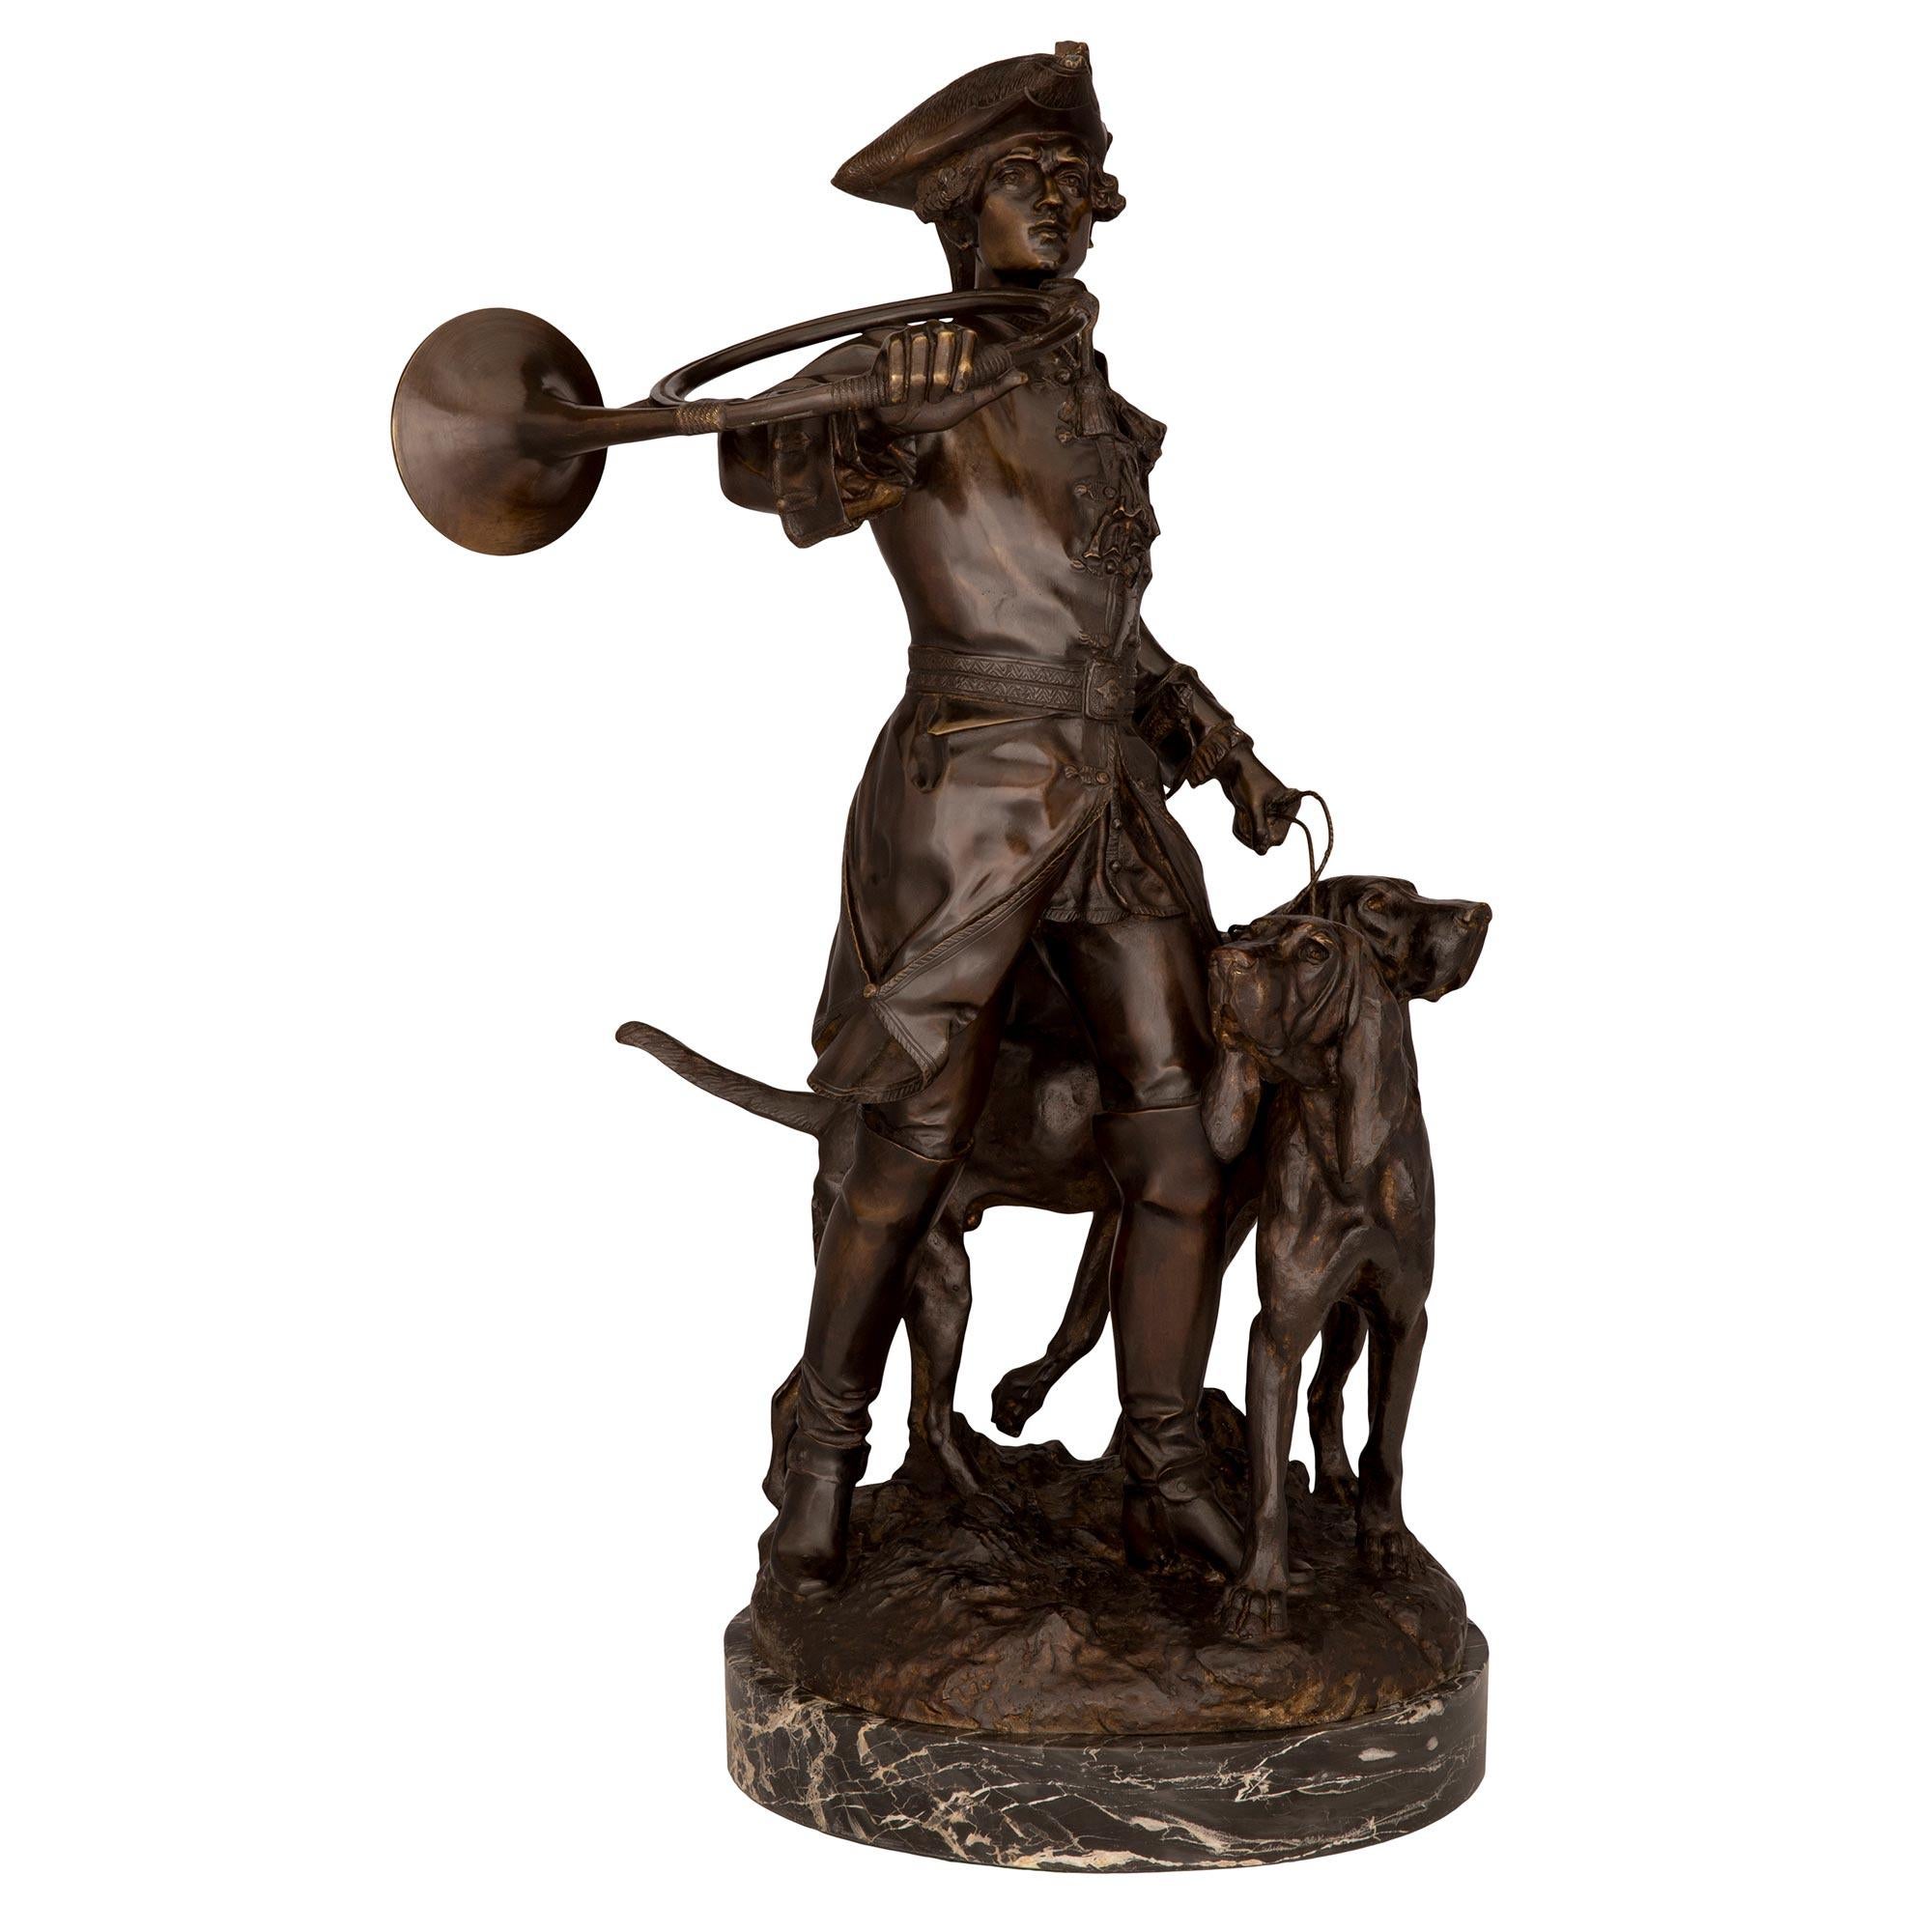 An extremely high-quality French 19th century Verdigris signed bronze statue. The statuary is raised by a circular mottled base with a wonderfully executed ground-like design where the hunter and his two dogs stand. The hunter is dressed in